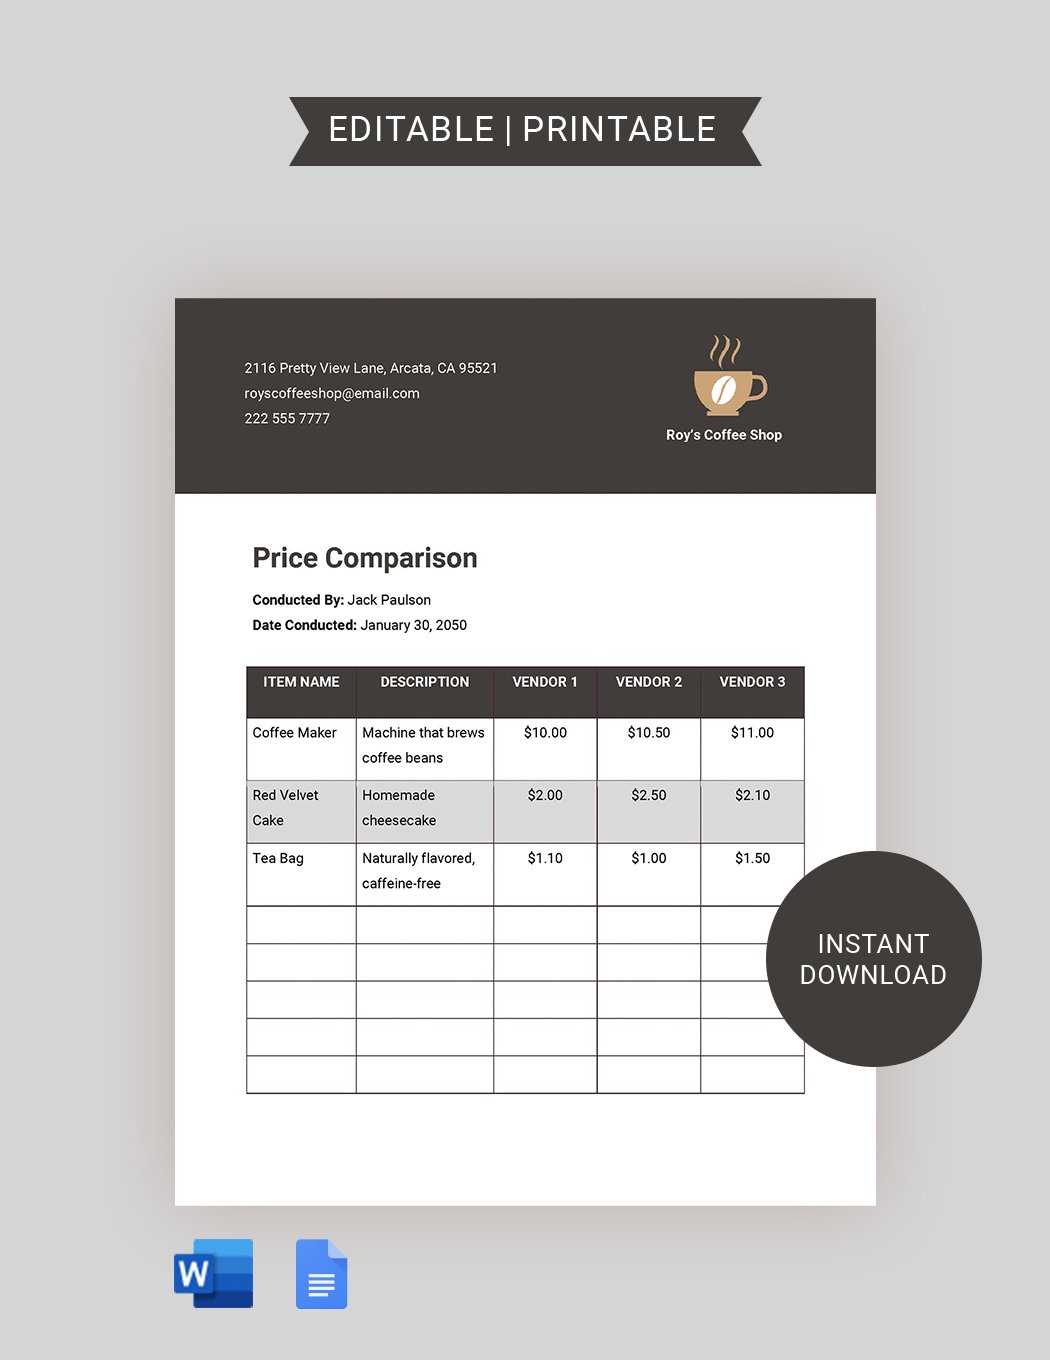 Product Price Comparison Template in Word, Google Docs